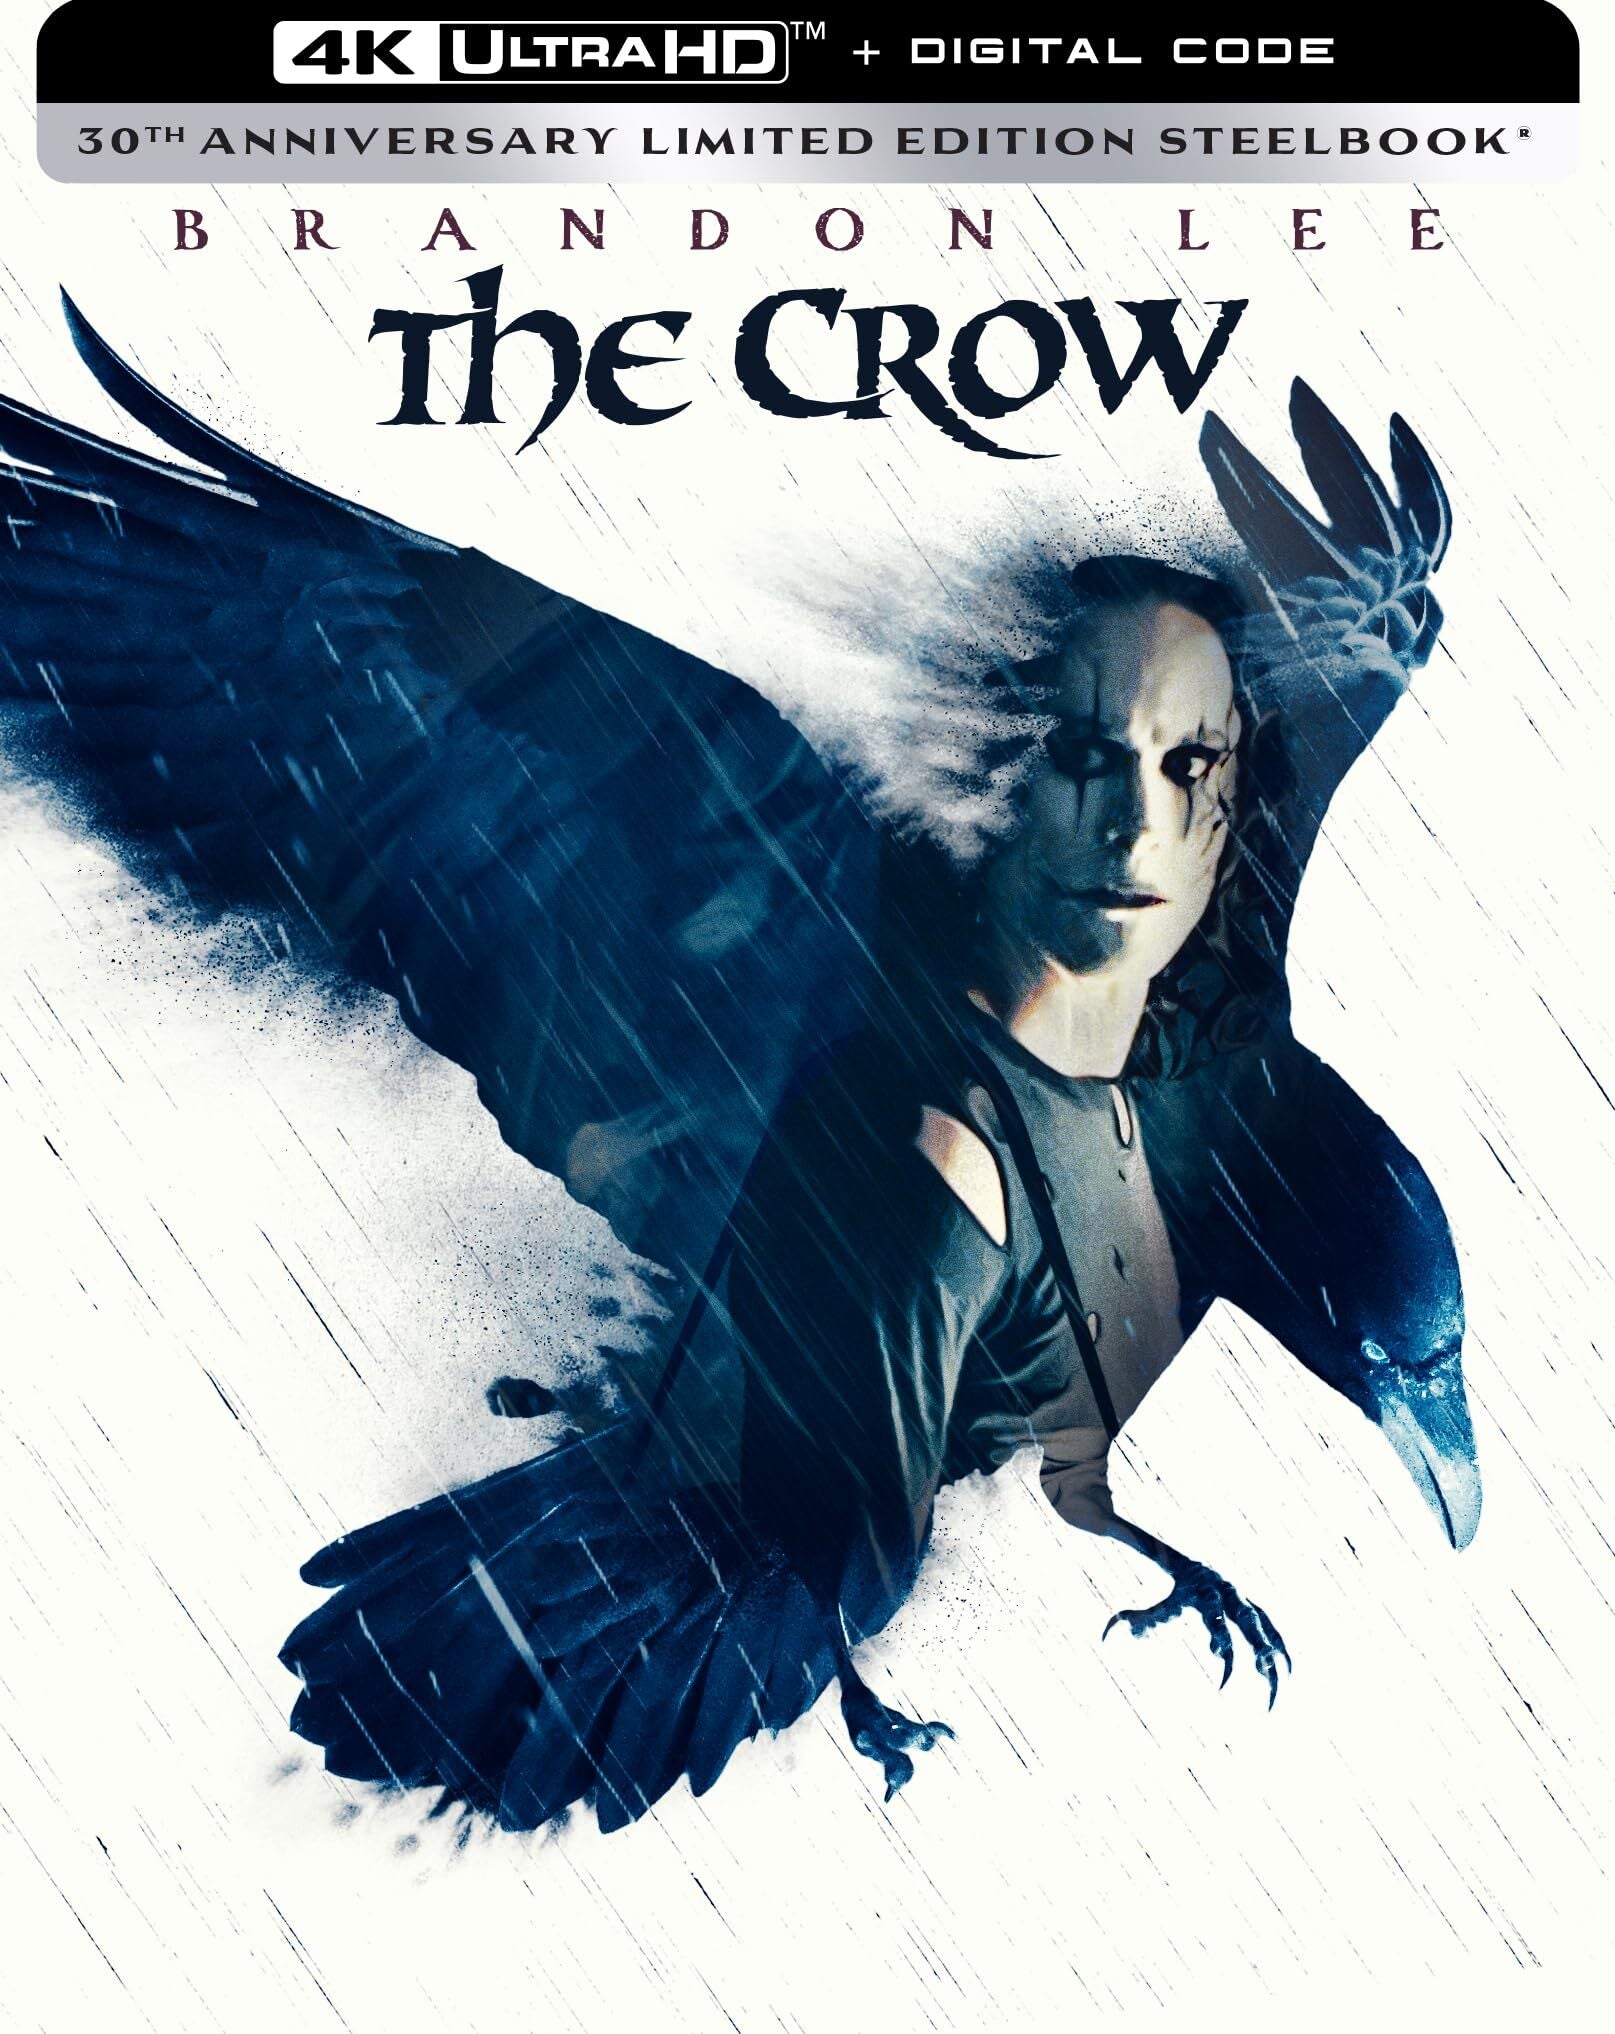 THE CROW (LIMITED EDITION) 4K UHD STEELBOOK [PRE-ORDER]